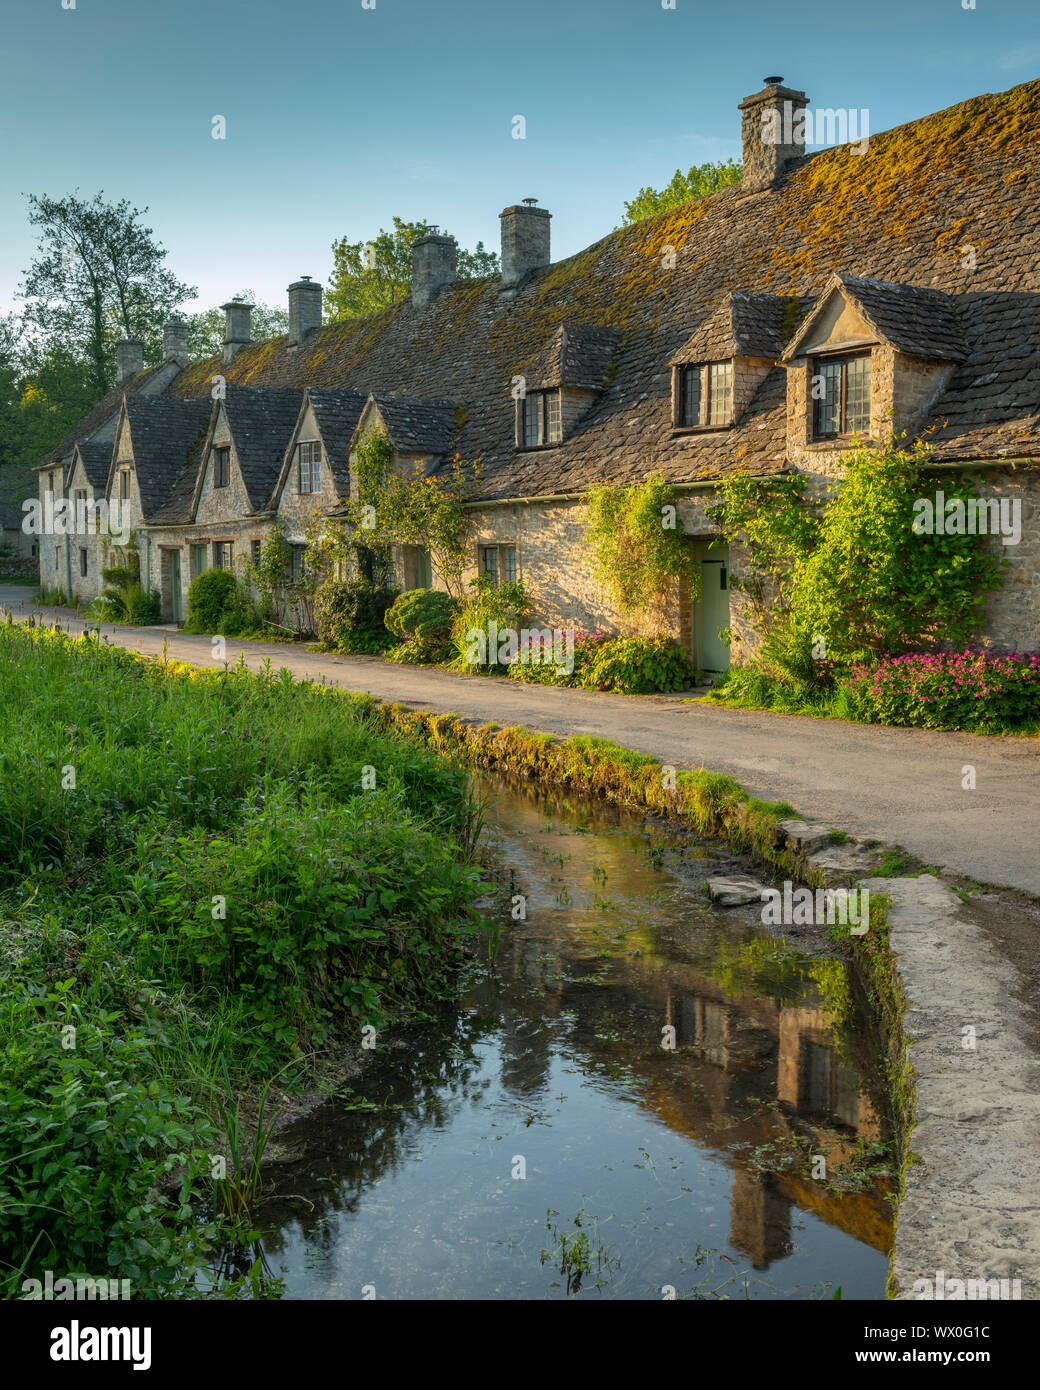 Arlington Row cottages in the pretty Cotswold village of Bibury, Gloucestershire, England, United Kingdom, Europe Stock Photo